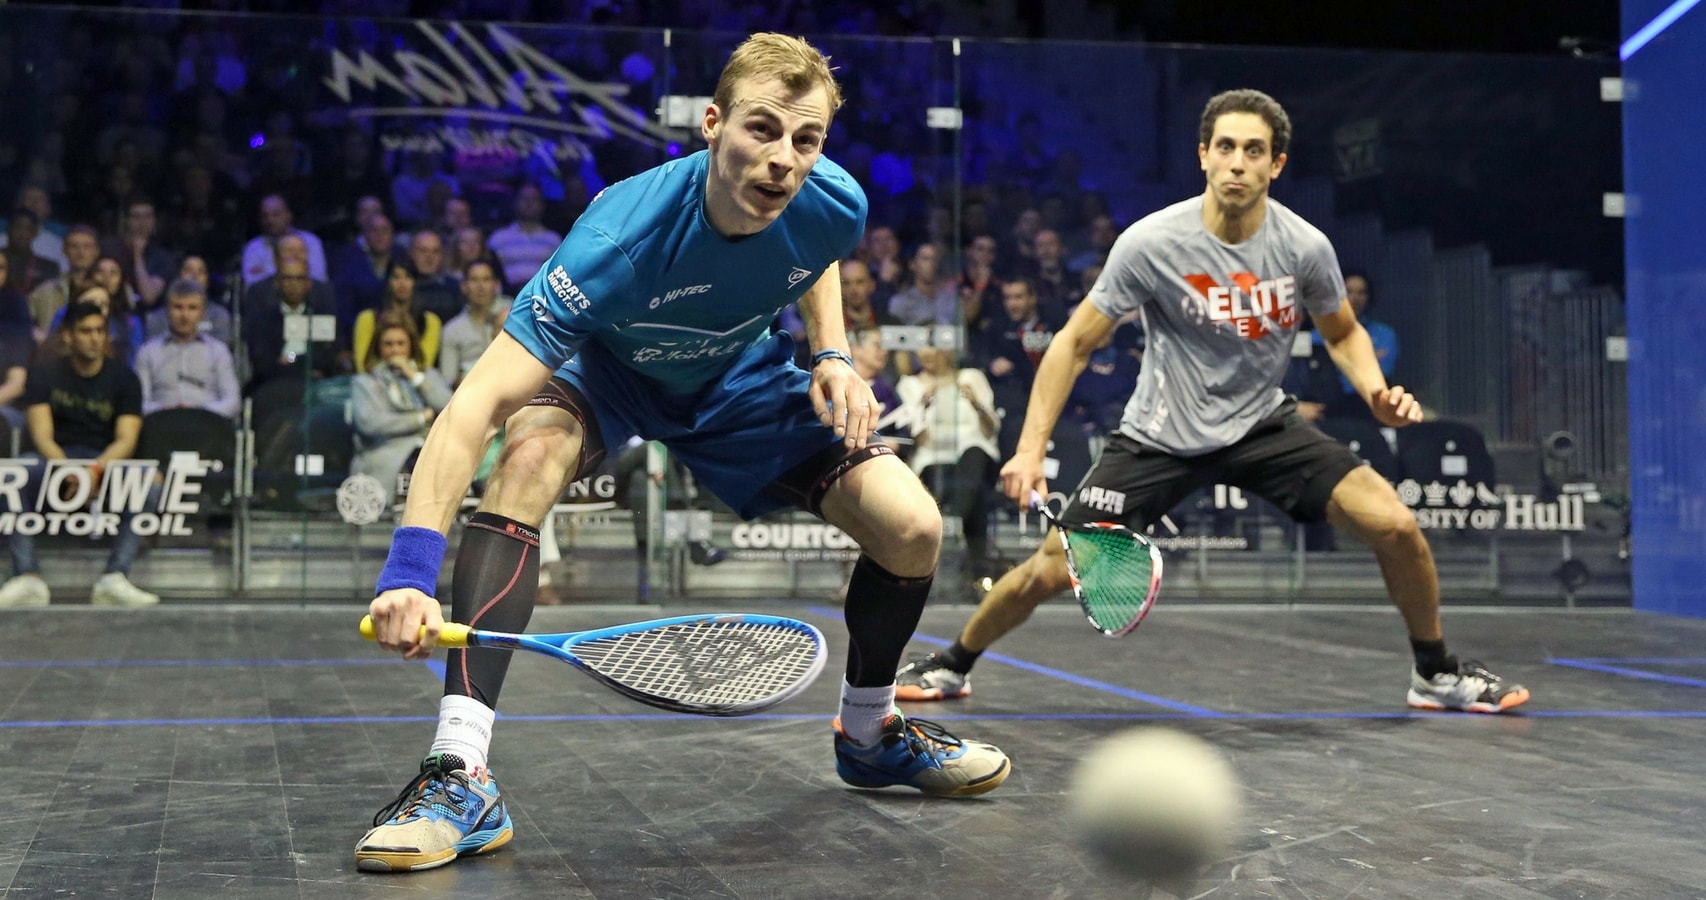 Nick Matthew will play top seed Mohamed ElShorbagy in the Allam British Open semi-final